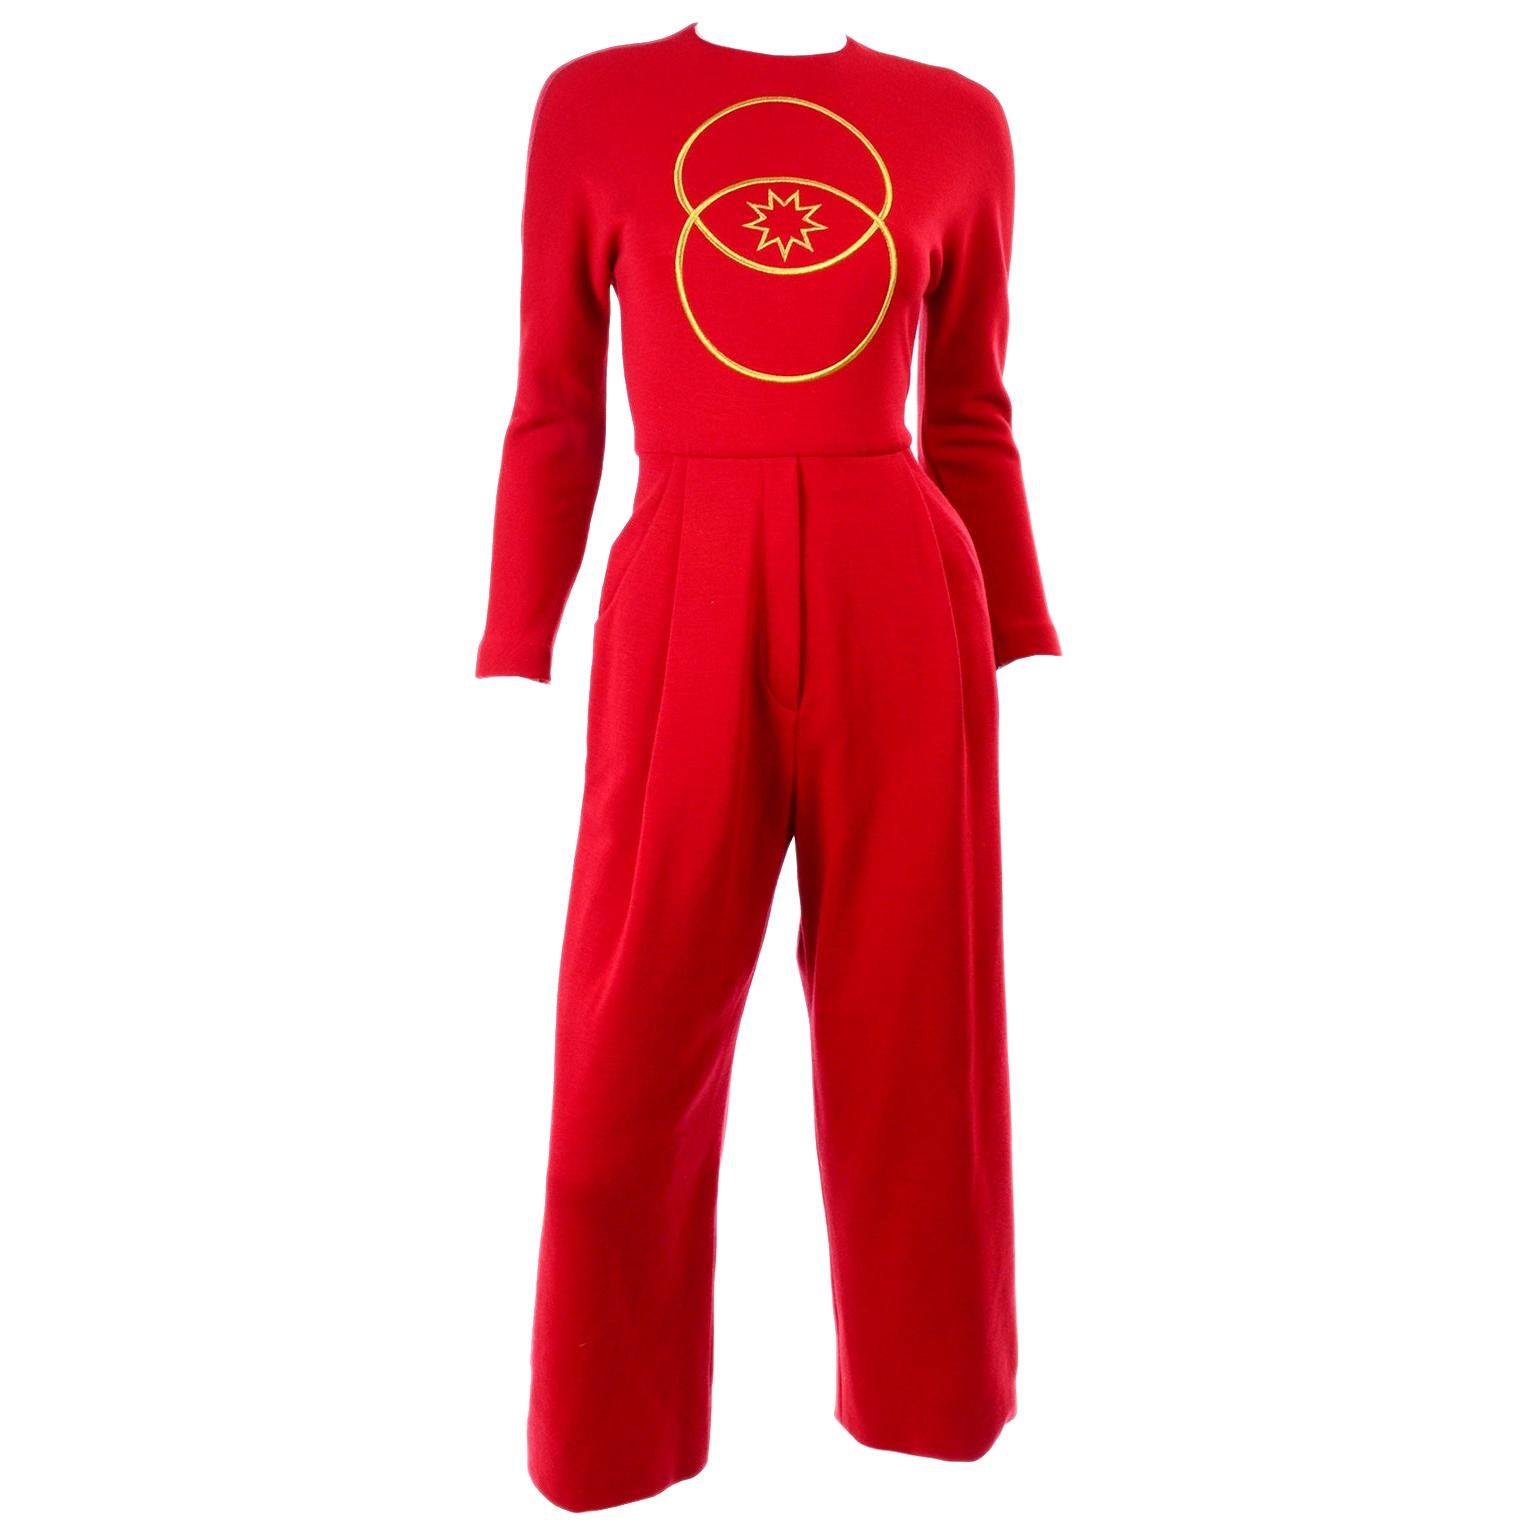 Red Vintage 1980s Geoffrey Beene Jumpsuit With Gold Circle and Star Embroidery